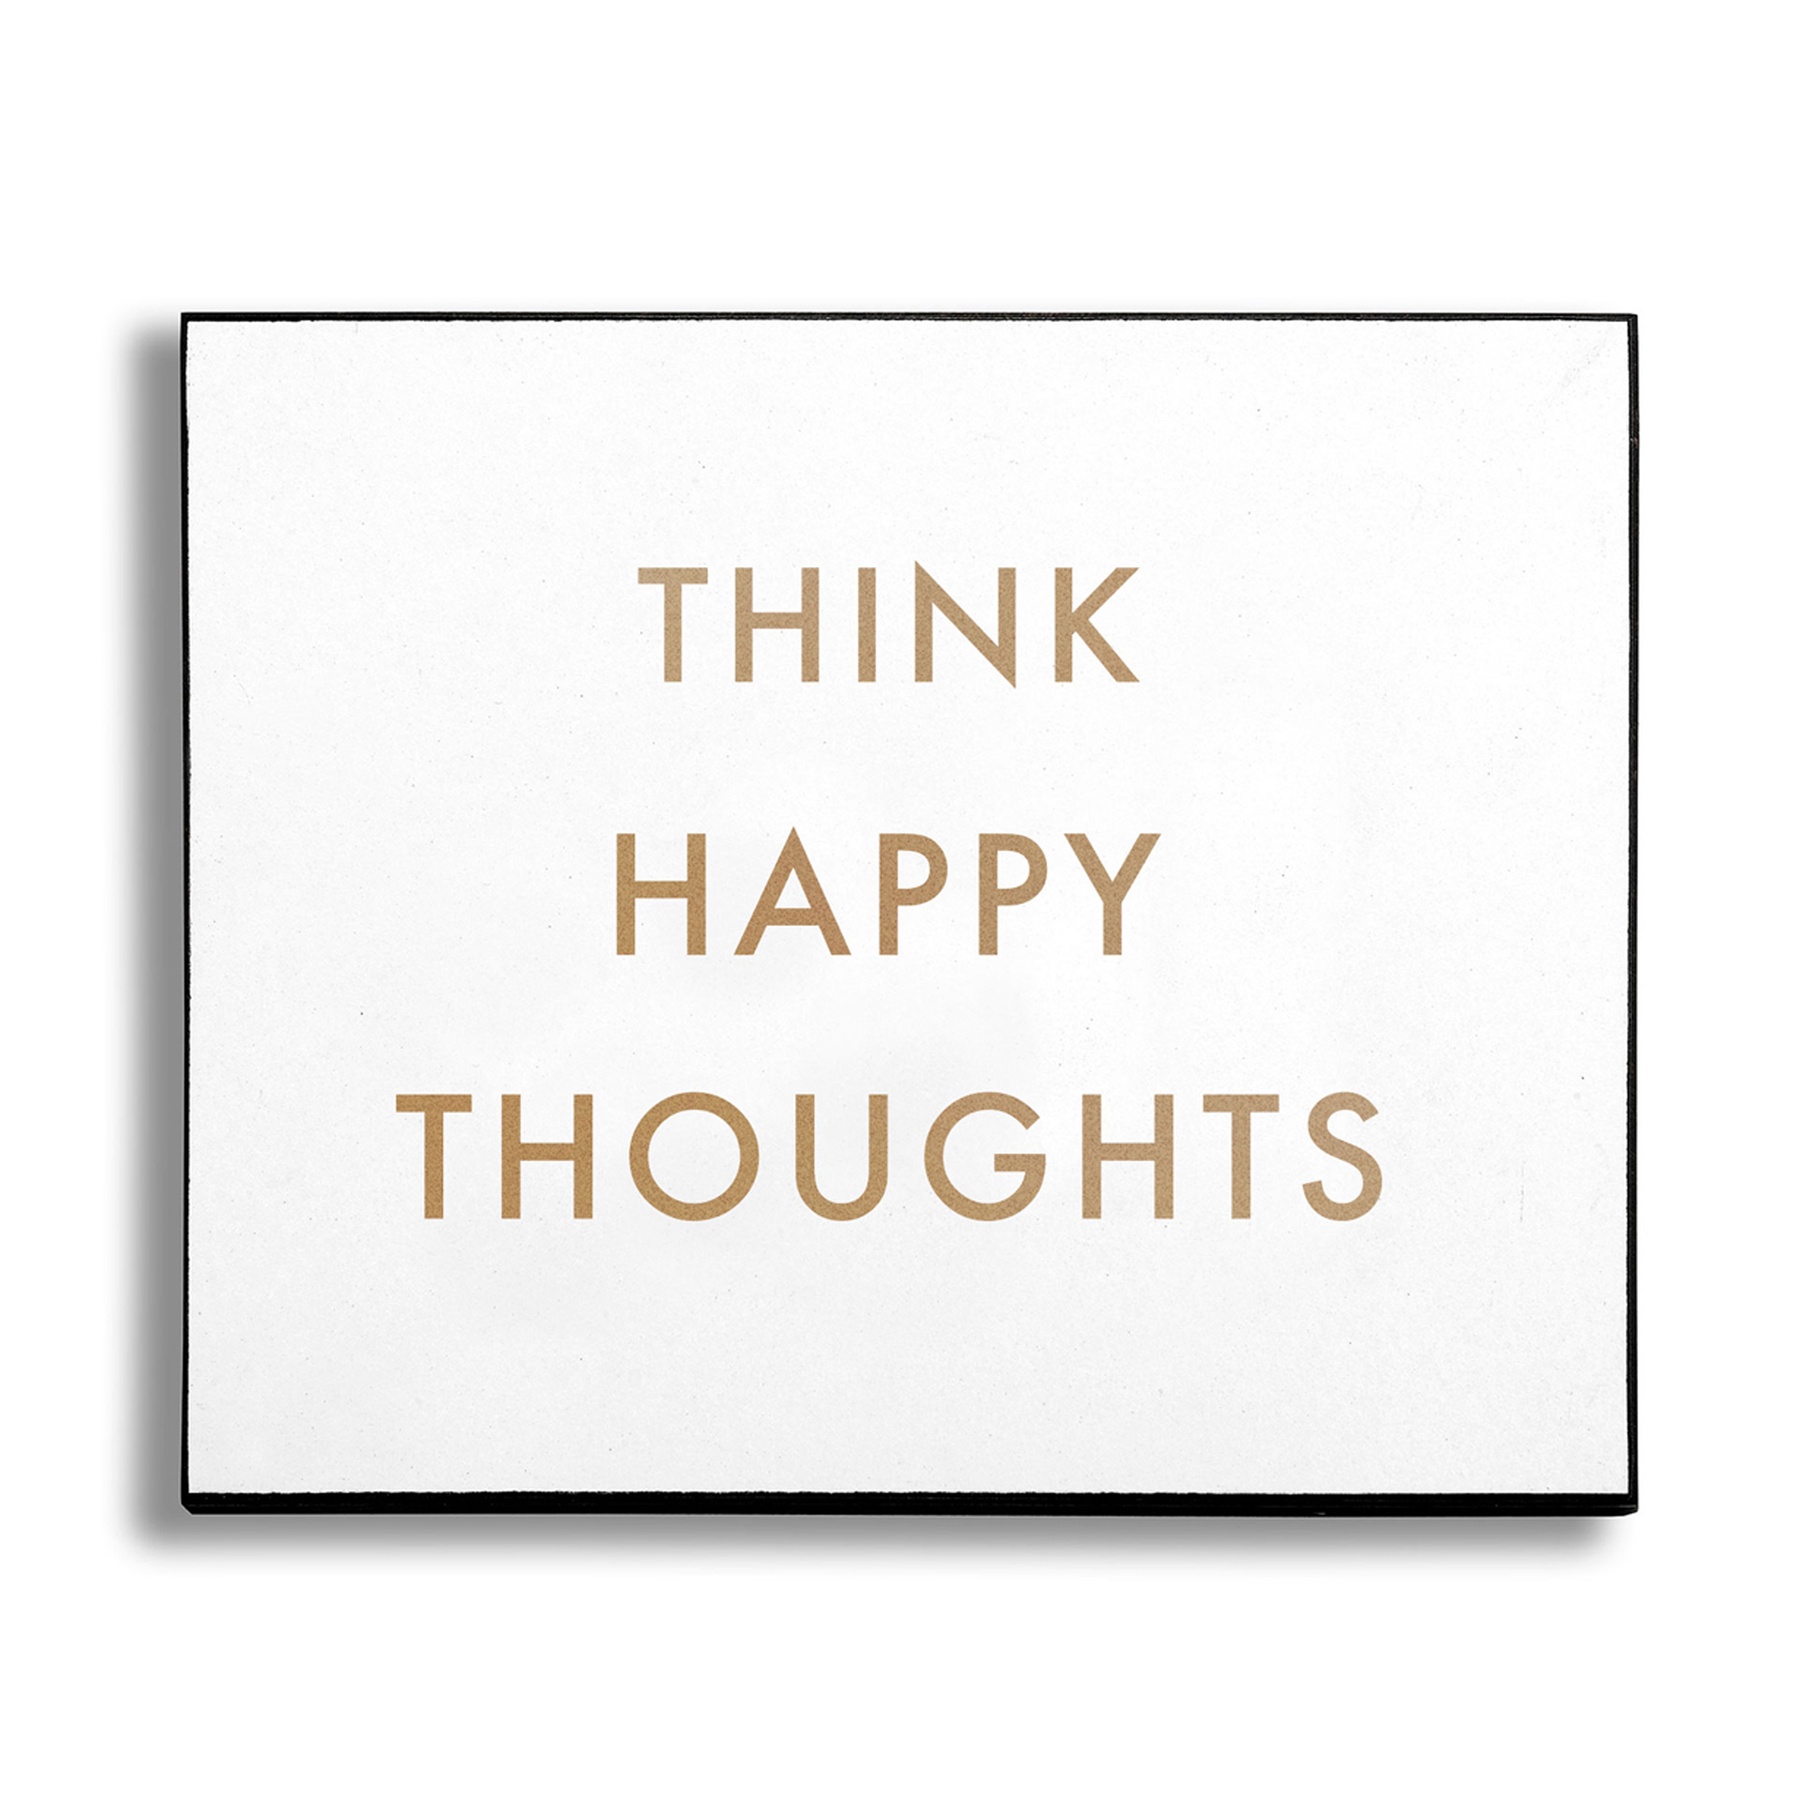 Think Happy Thoughts Gold Foil Plaque - Image 1